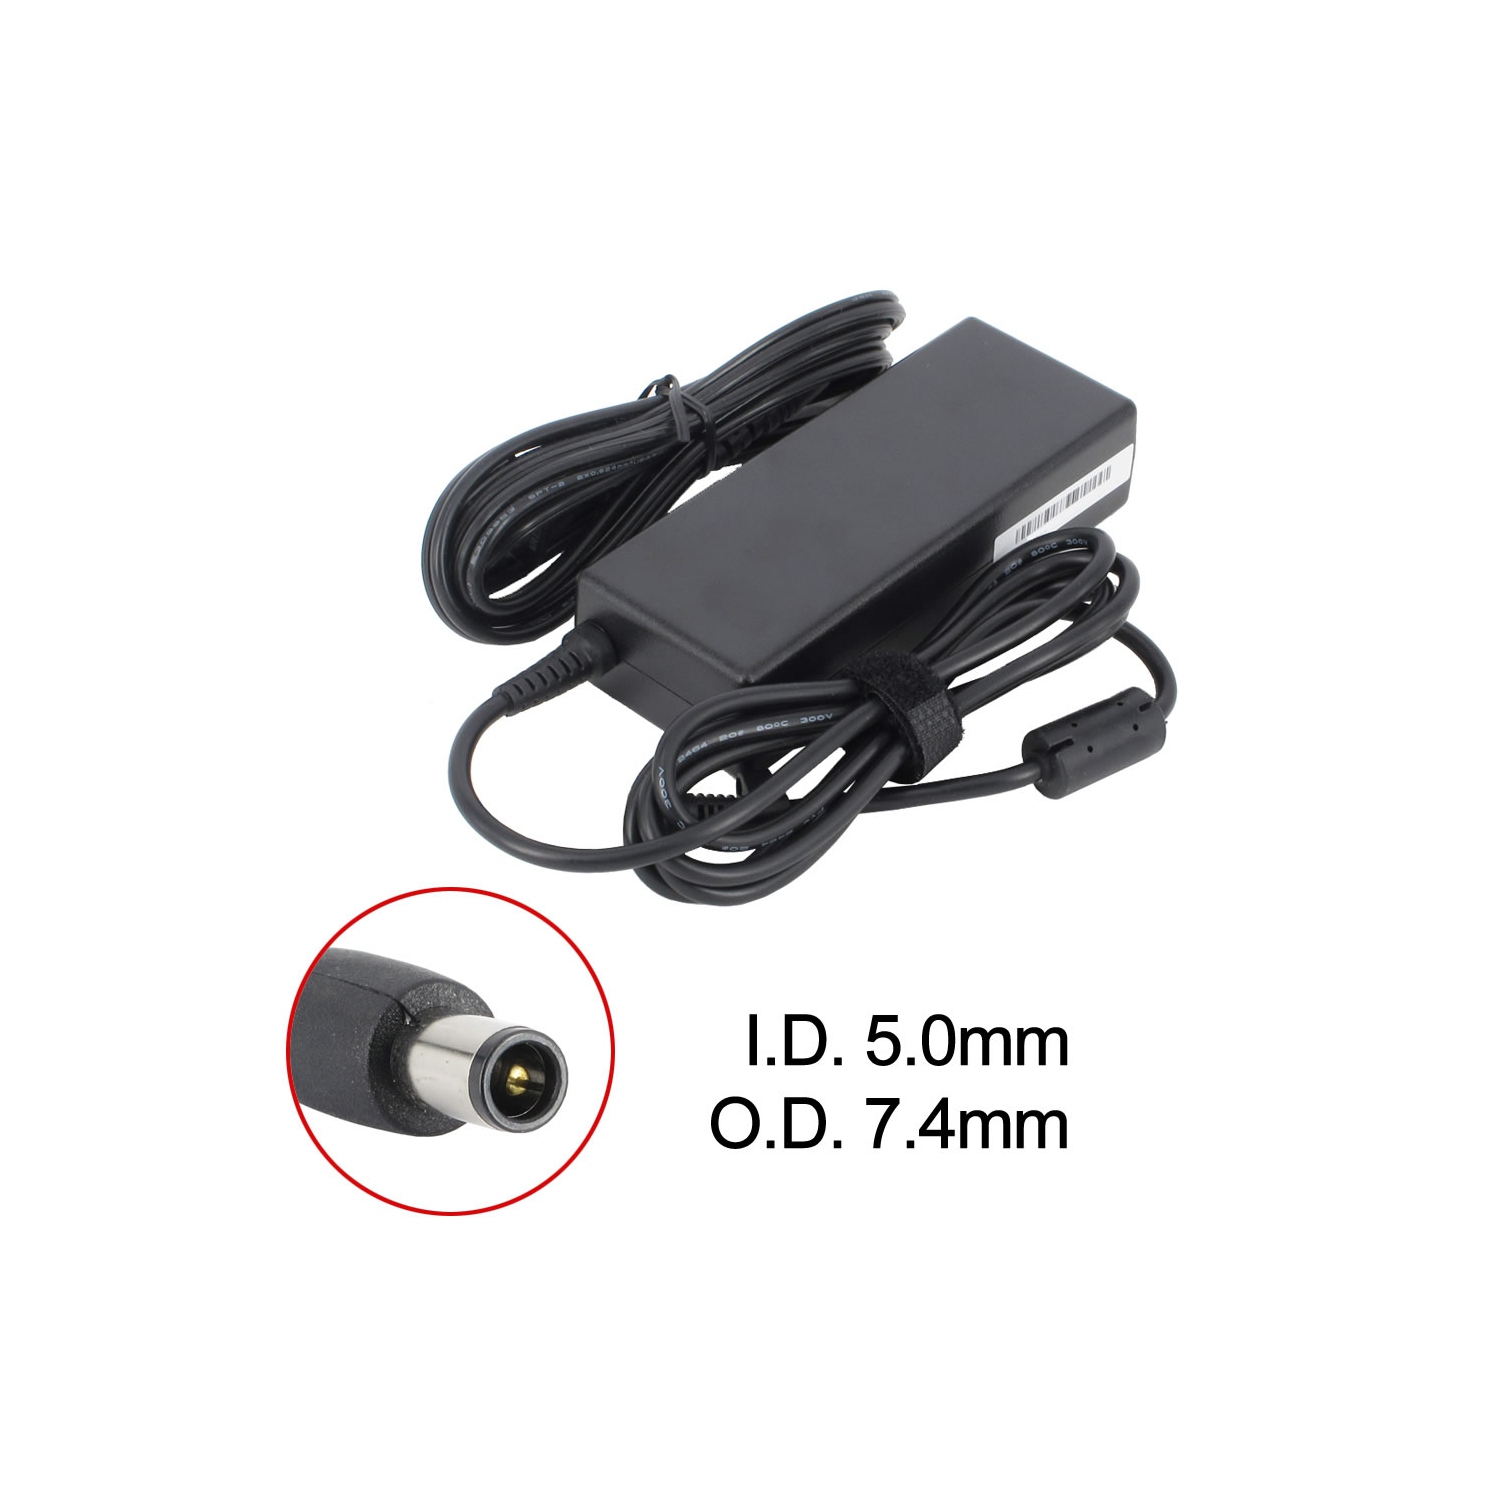 New Laptop AC Adapter for HP Pavilion g6-1A20, 409515-001, 463553-004, 609939-001, HP-OK065B133SELF, PA-1900-32HE